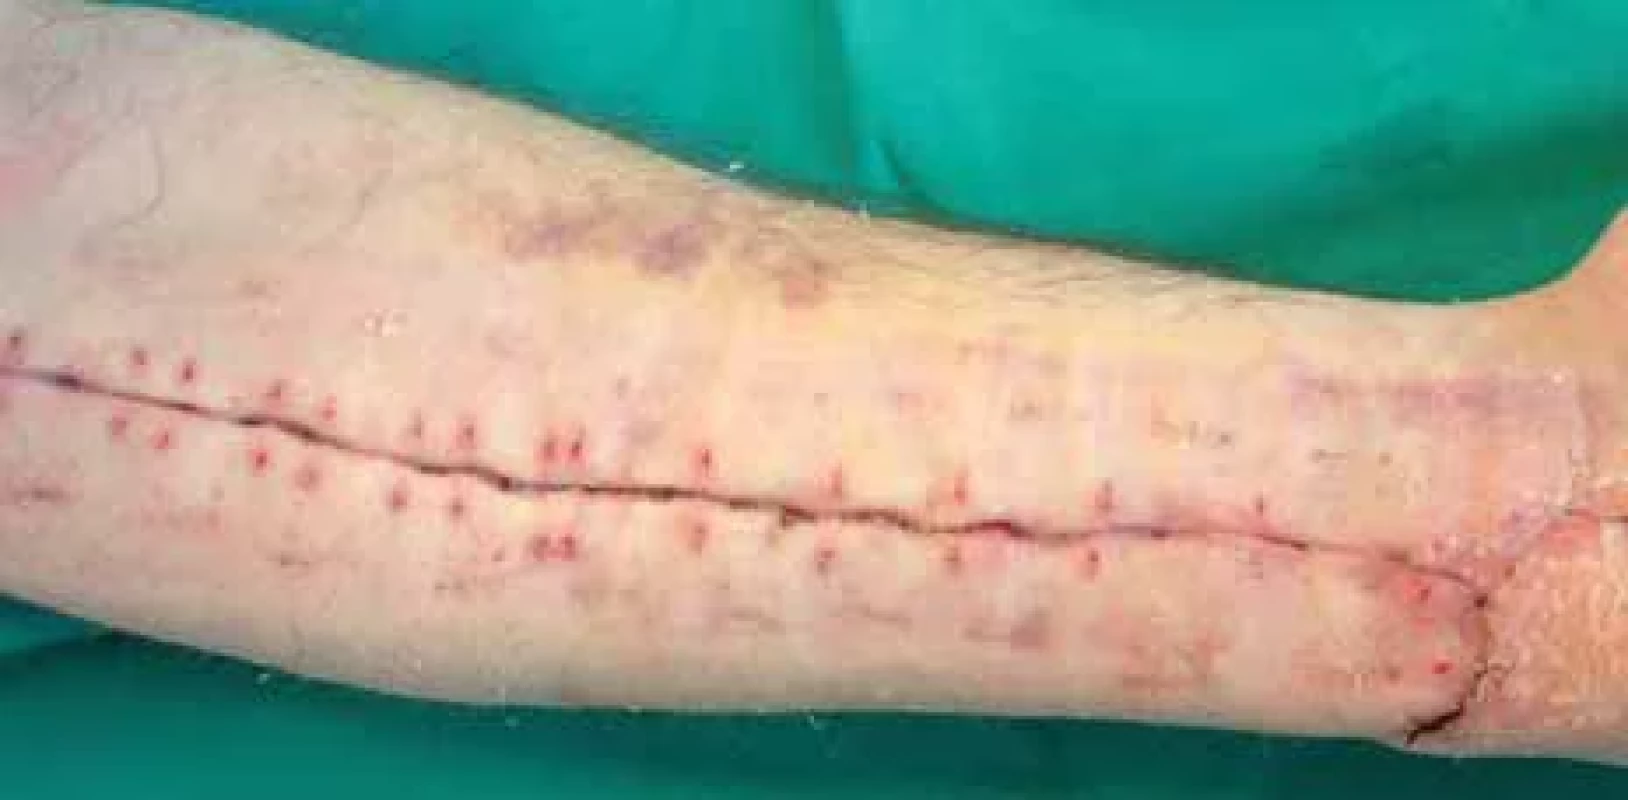 Left forearm fasciotomy wound after removal of skin staples.